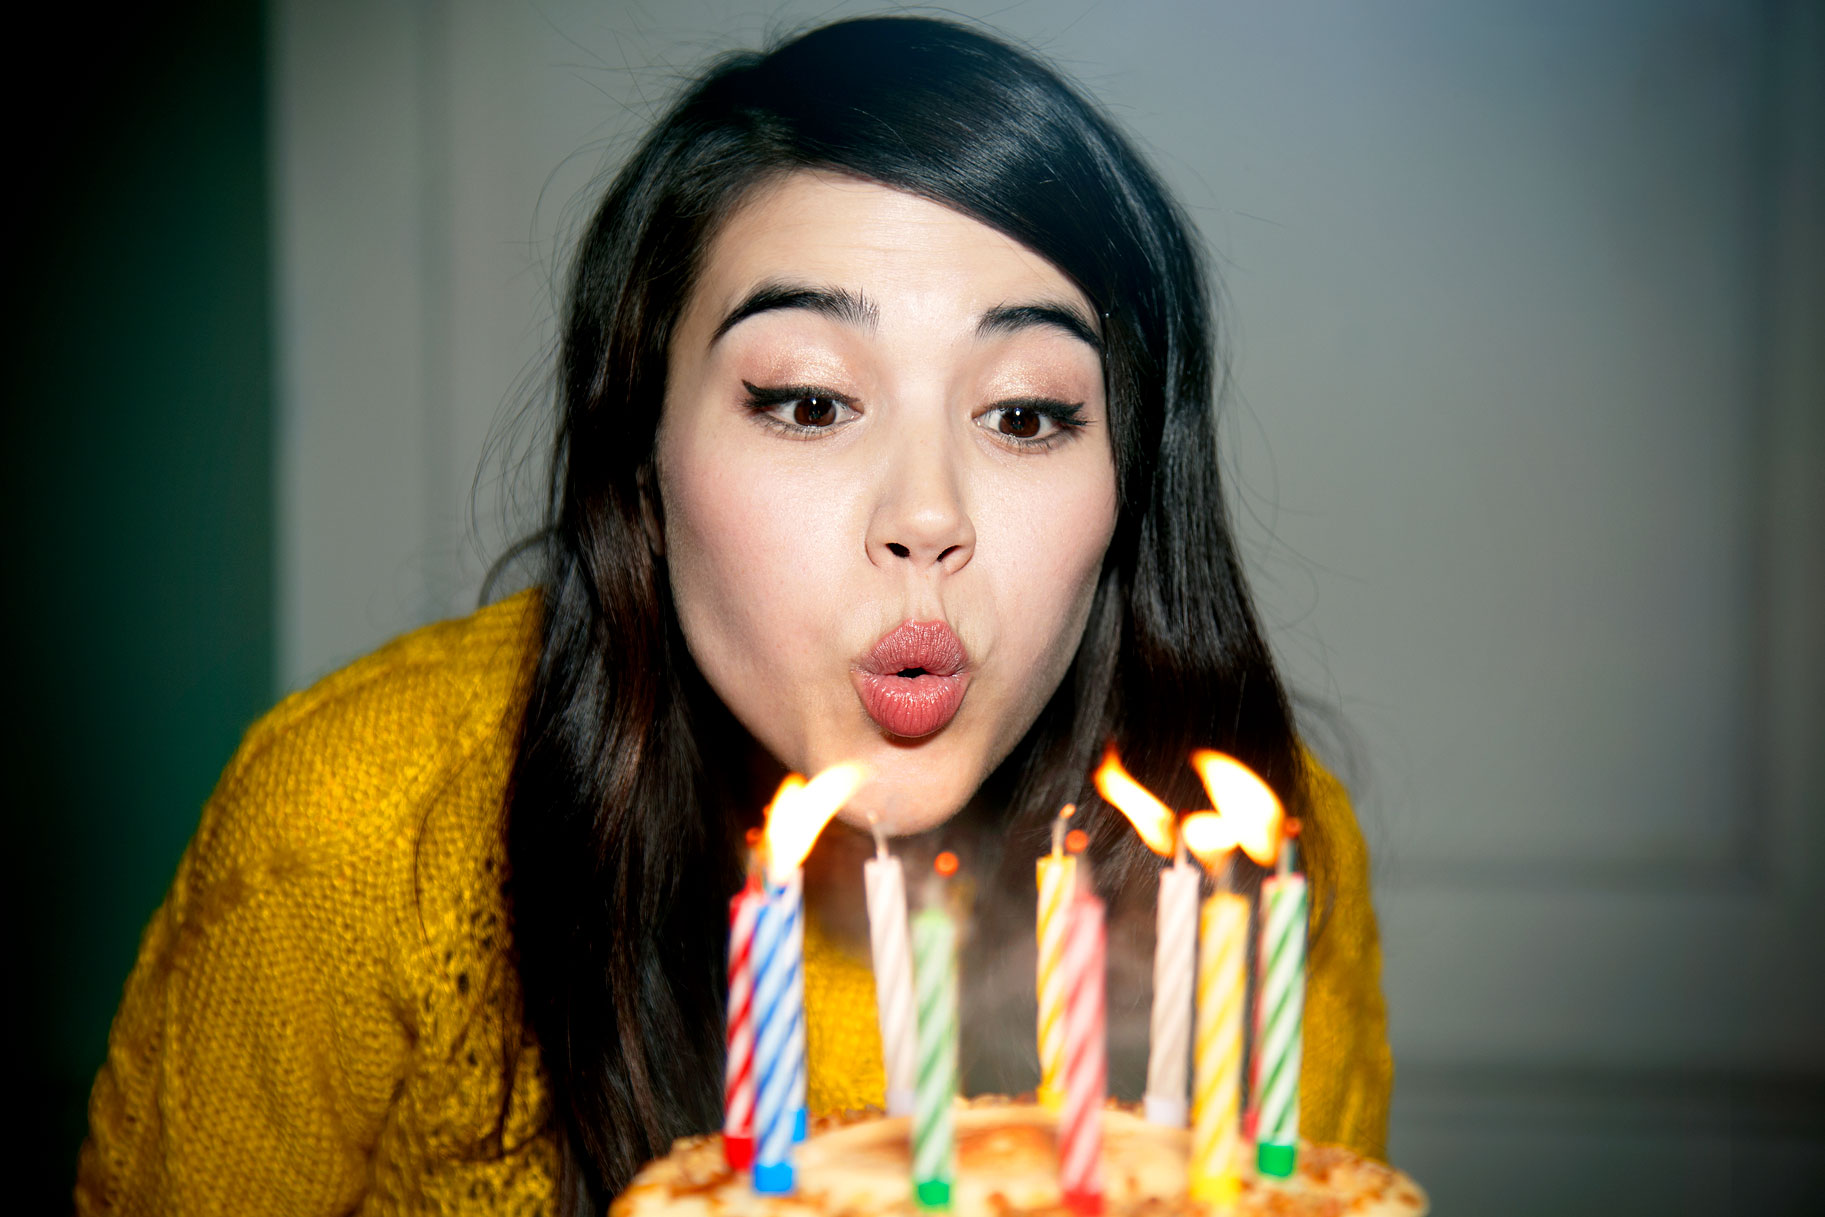 Superstitions busted: Blowing out birthday candles | Daily Sabah